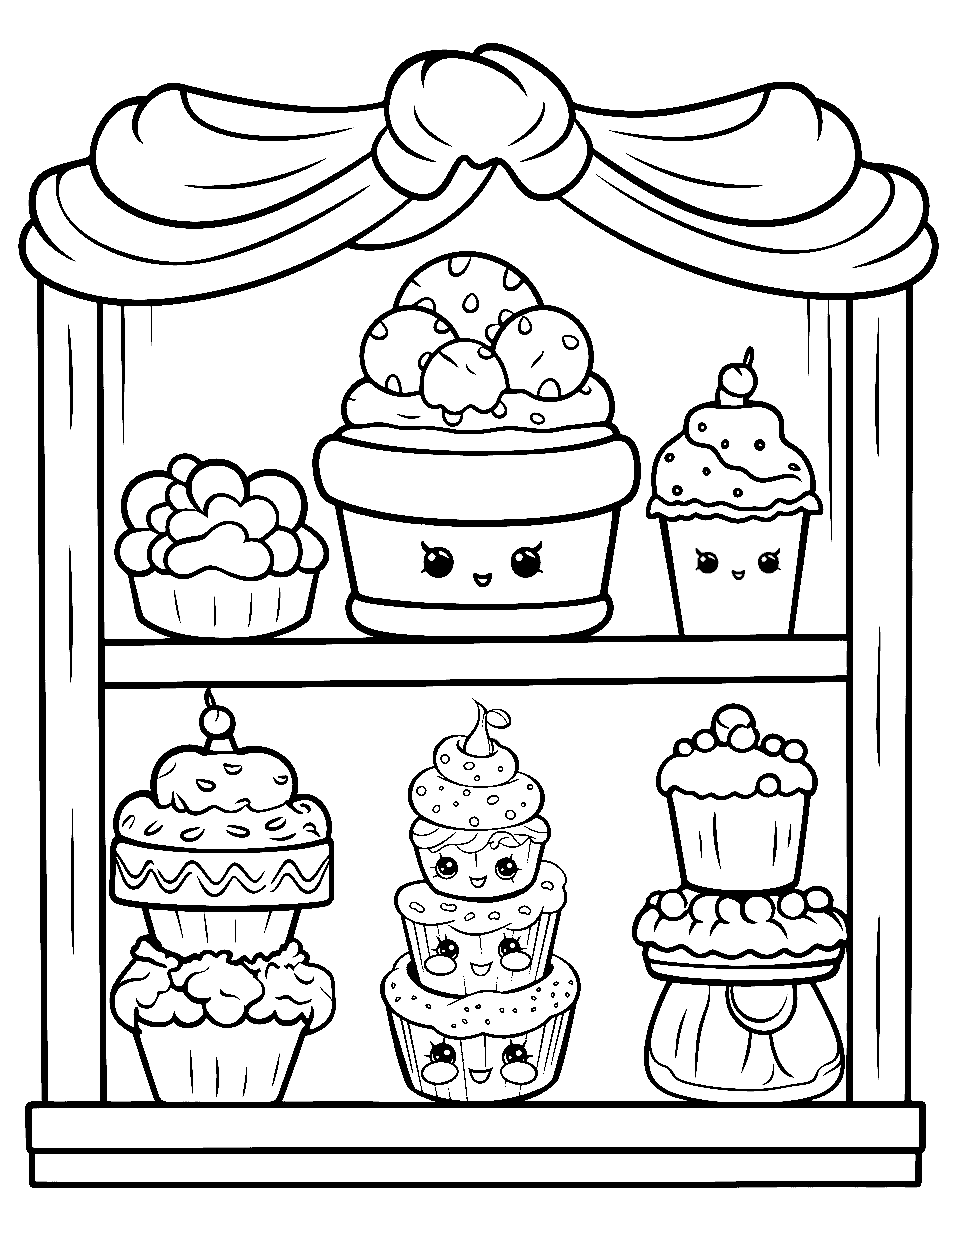 Bakery Shopkin Bliss Coloring Page - Shopkins like pastries and bread being displayed in a bakery window.